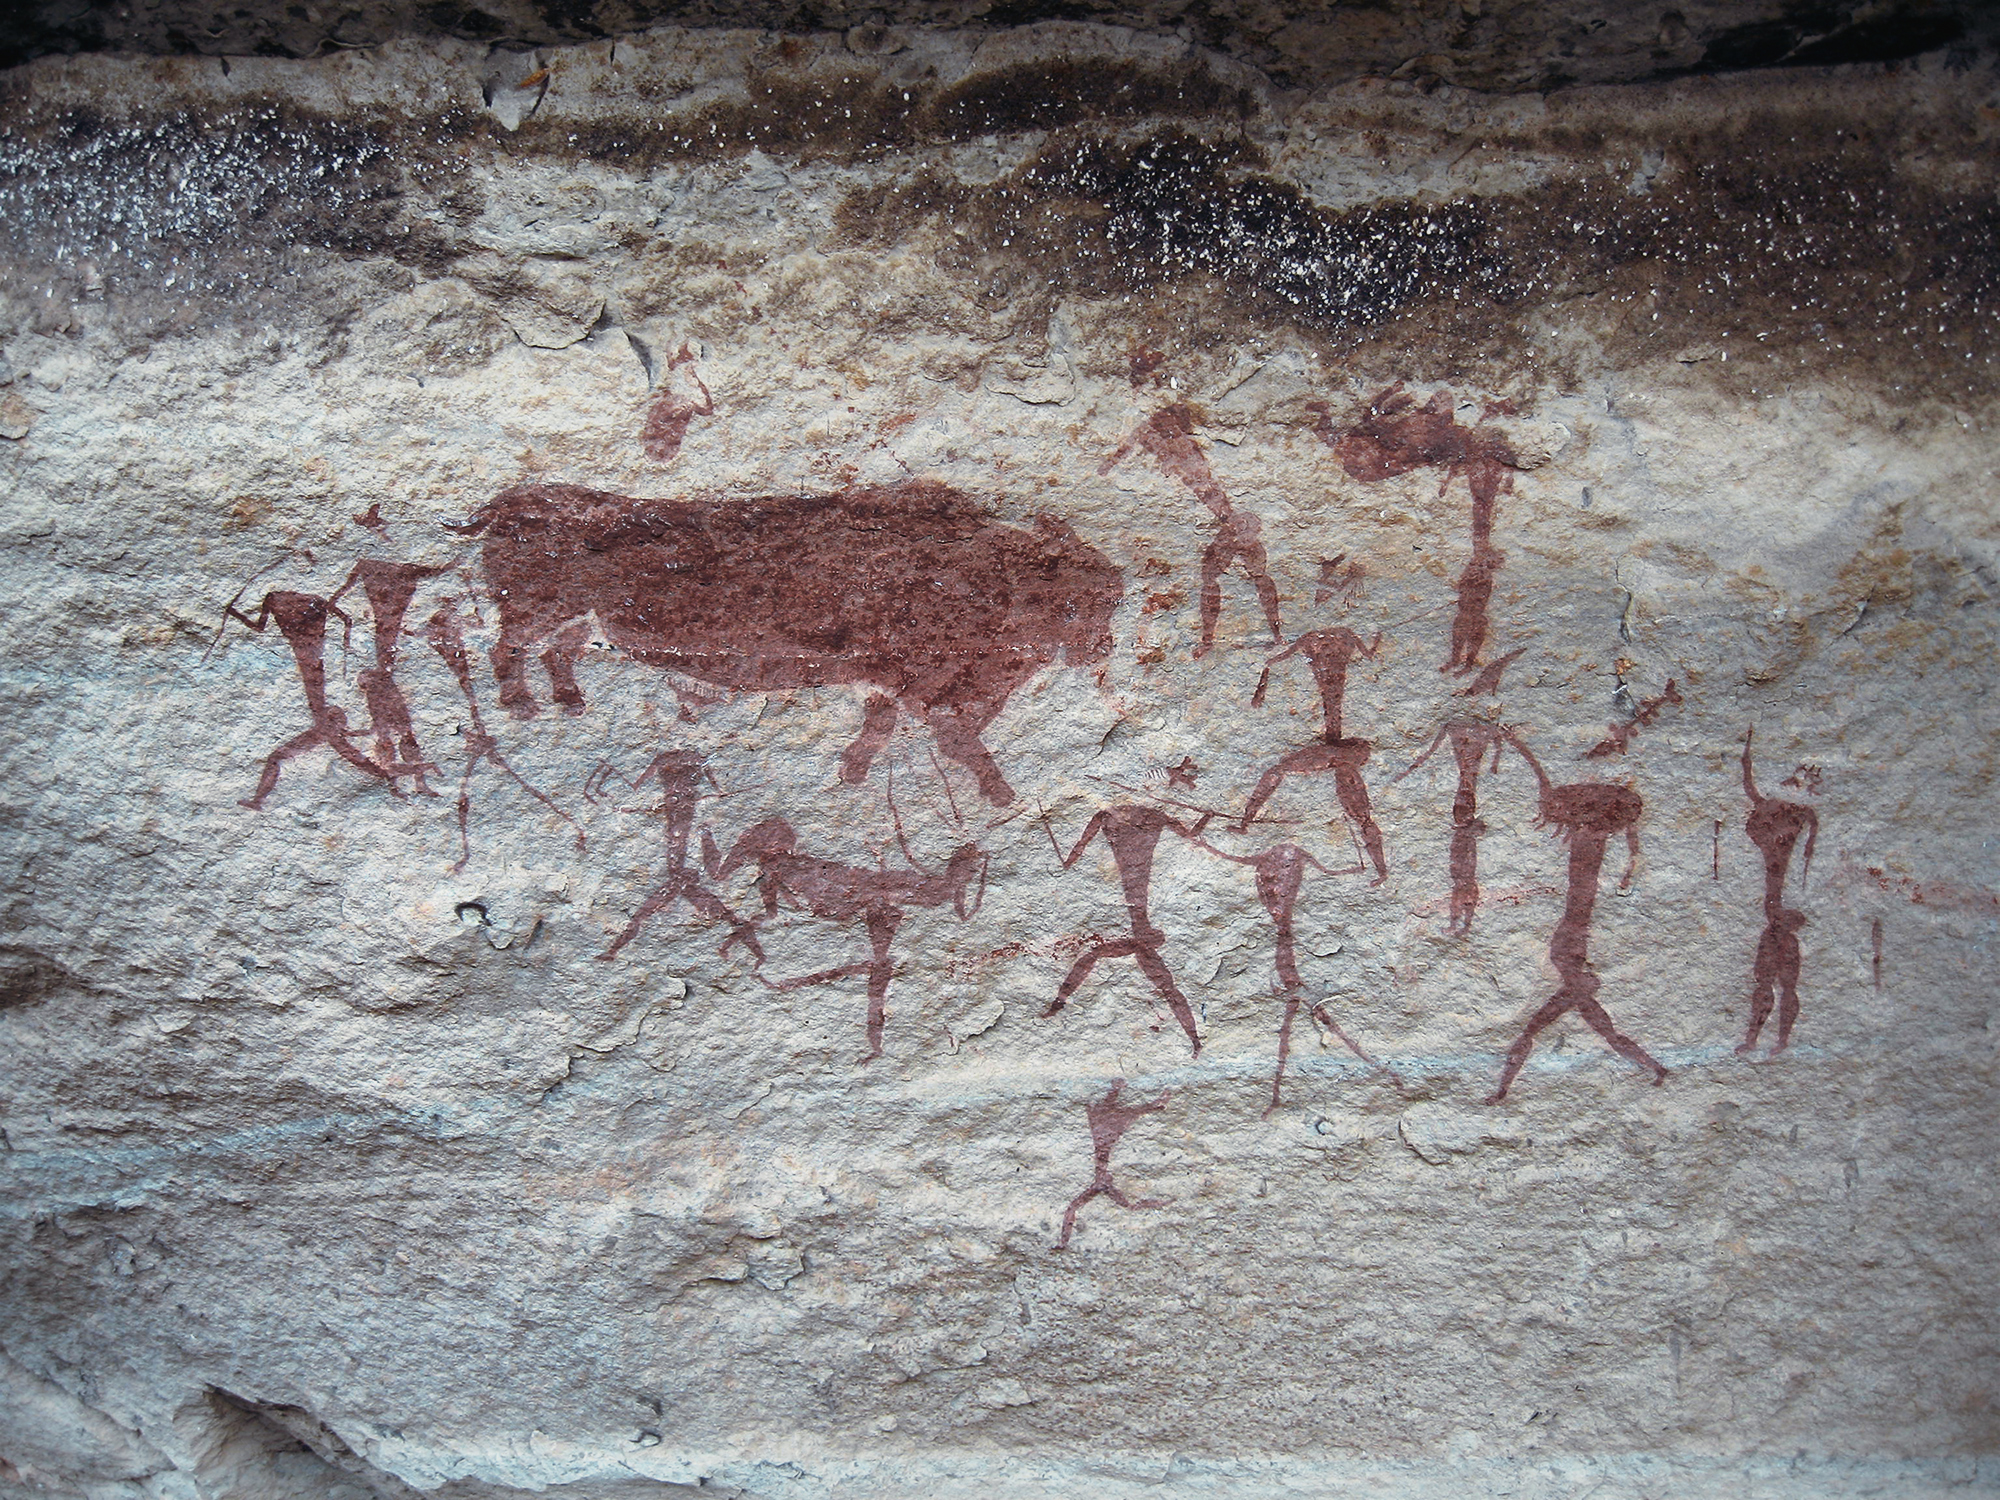 Capturing the Rain Bull rock art paintings reflect the San
travelling to the spirit realm San Rock Art South Africa